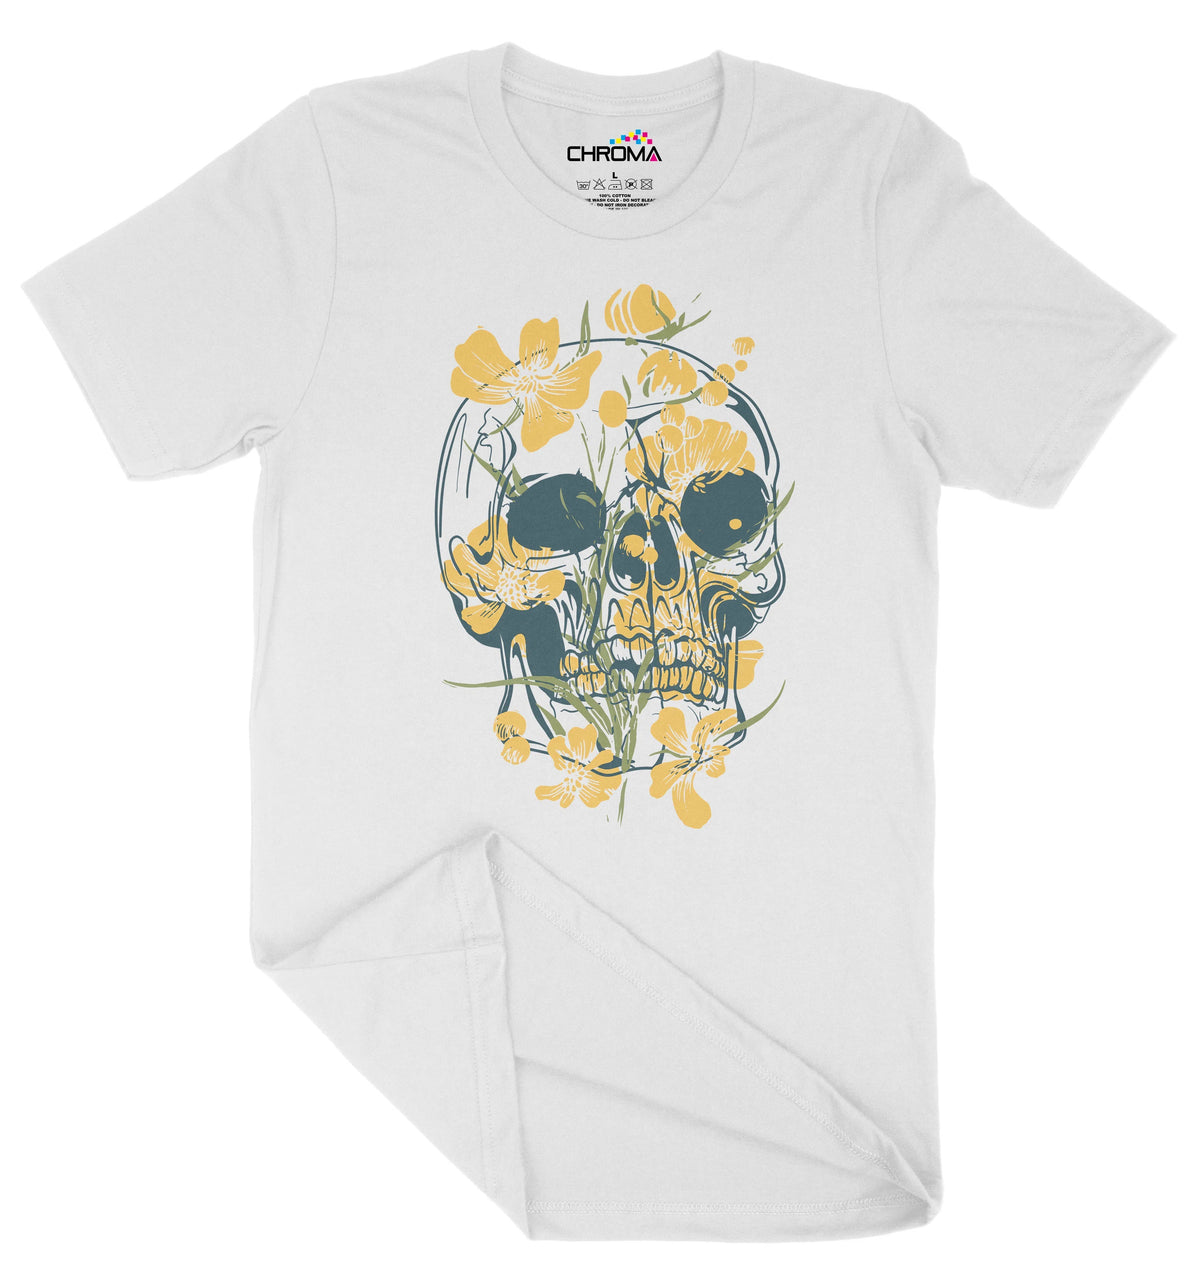 Beauty In Death Unisex Adult T-Shirt | Premium Quality Streetwear Chroma Clothing